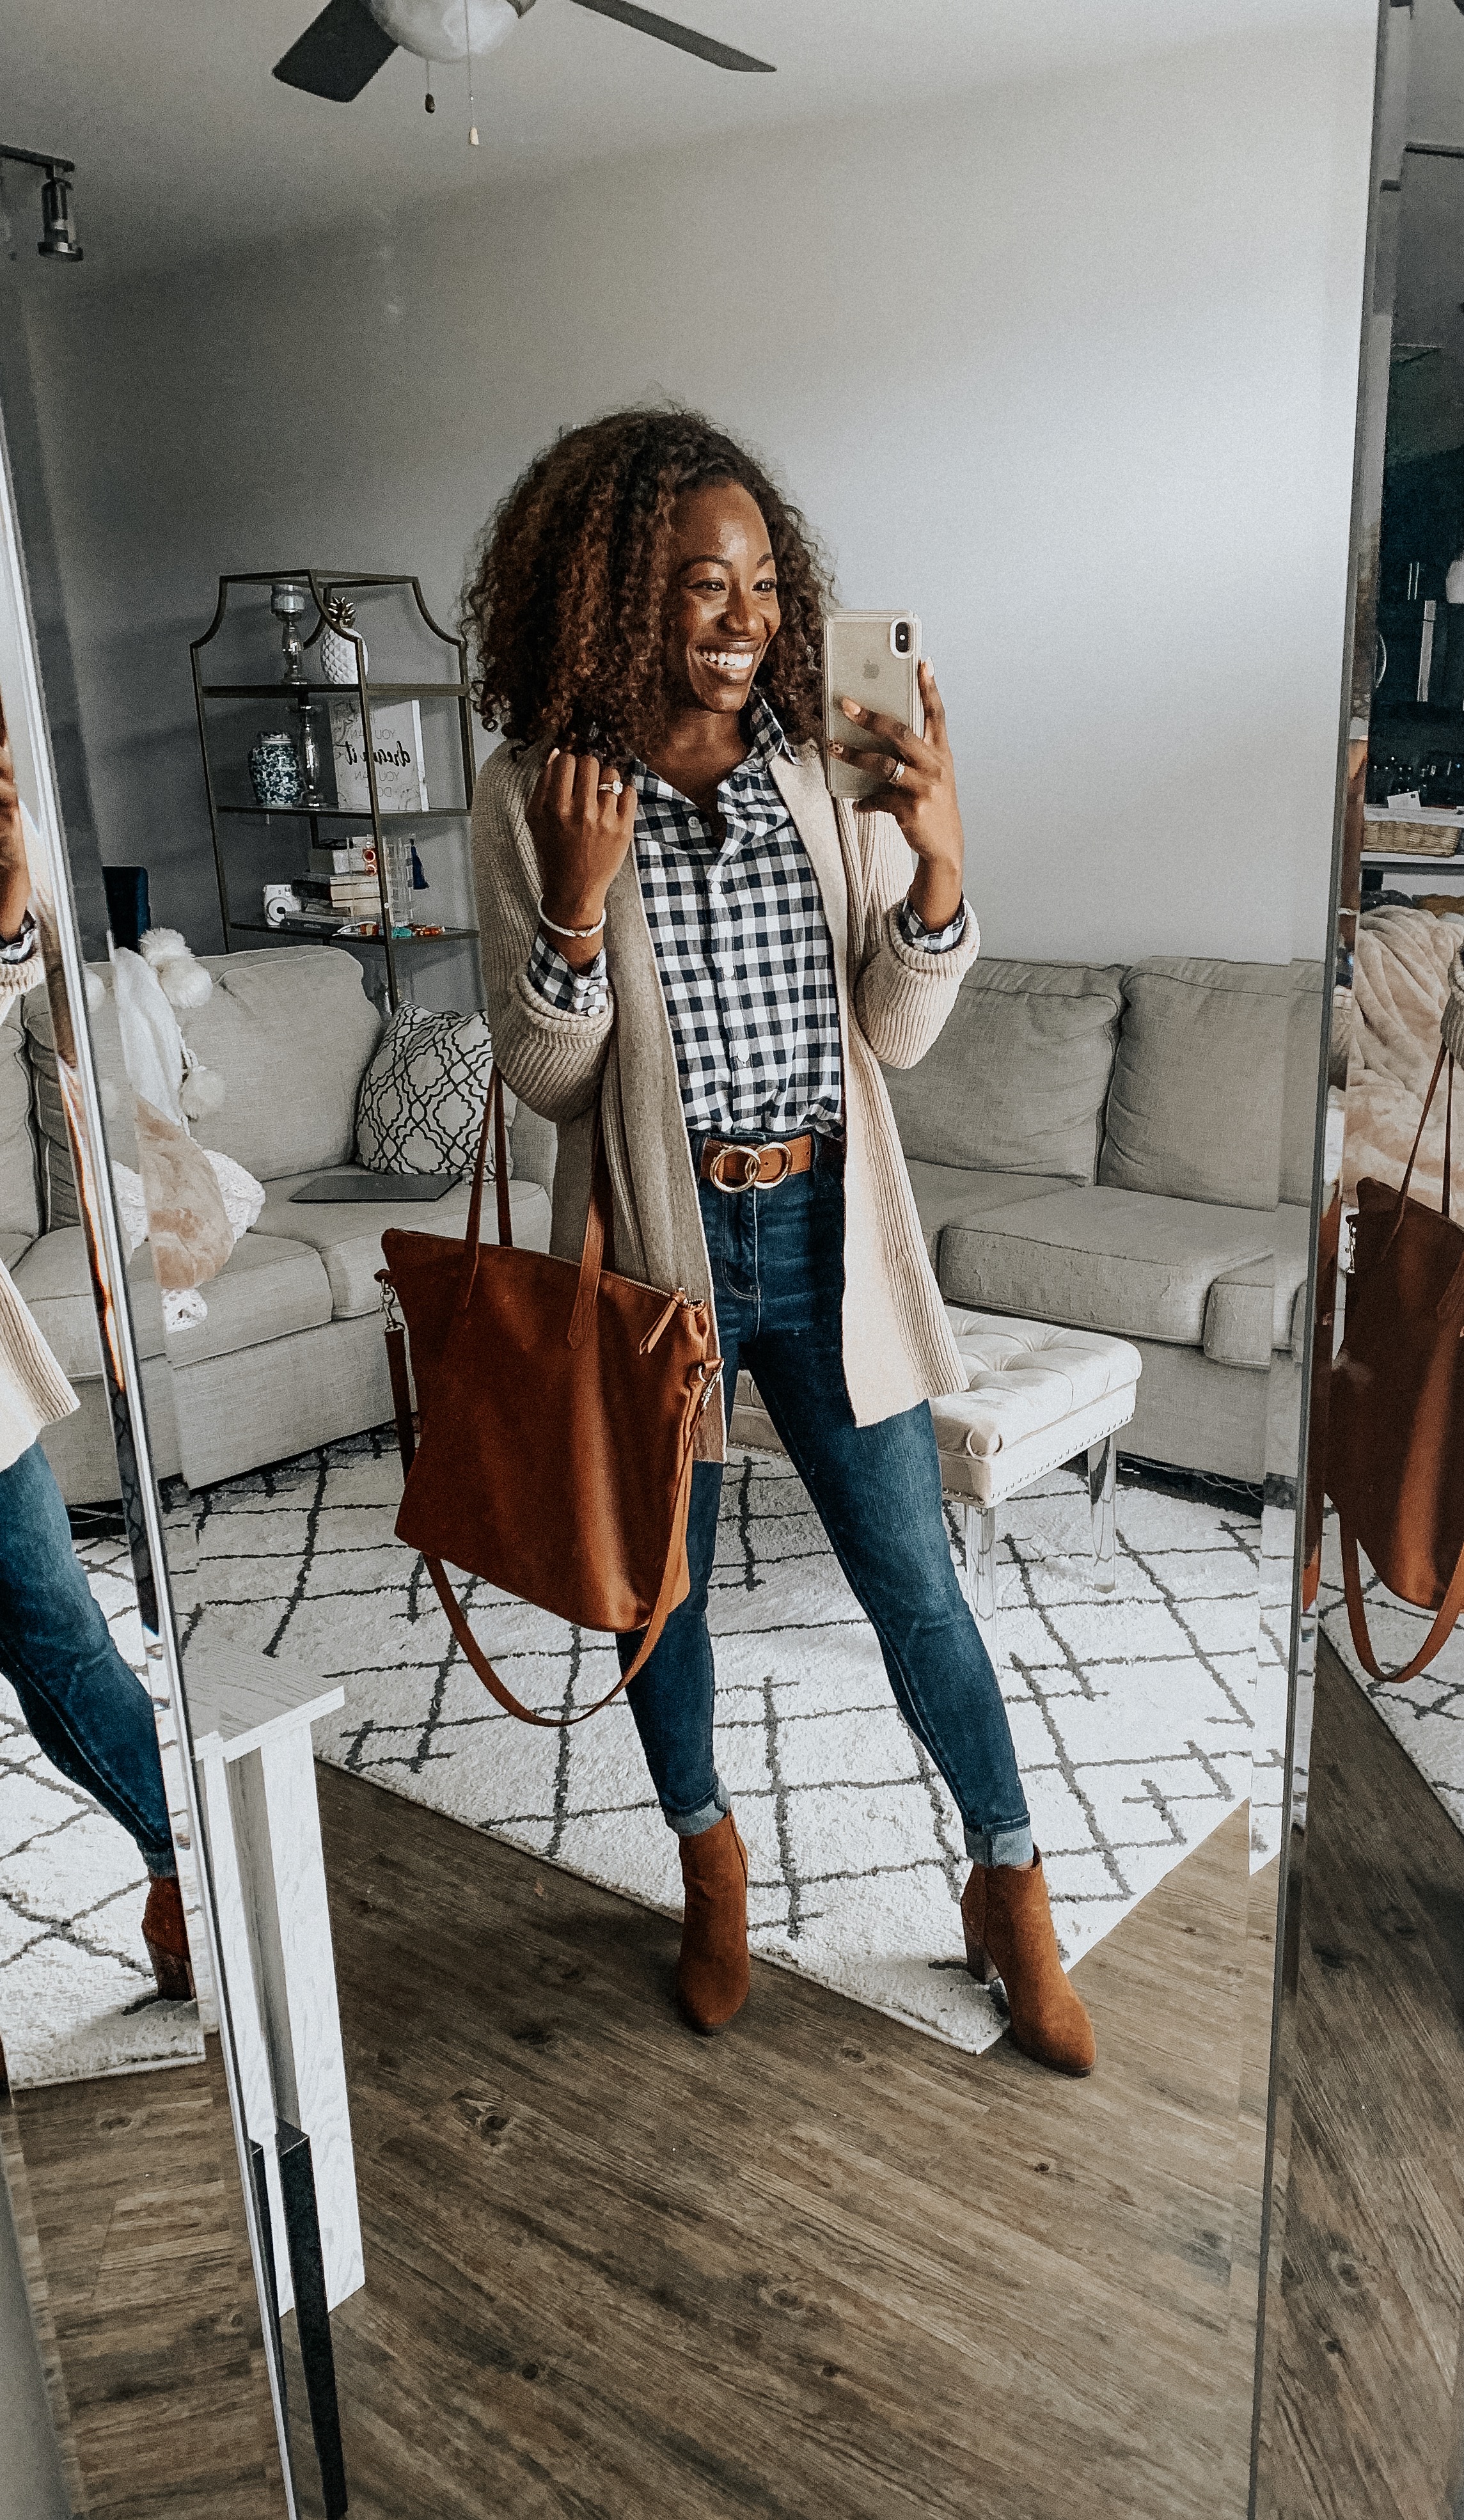 How to style a gingham flannel for work | Charlotte fashion and lifestyle blogger GoodTomiCha | neutral cardigan, ae jeans, cognac ankle boots, work tote bag